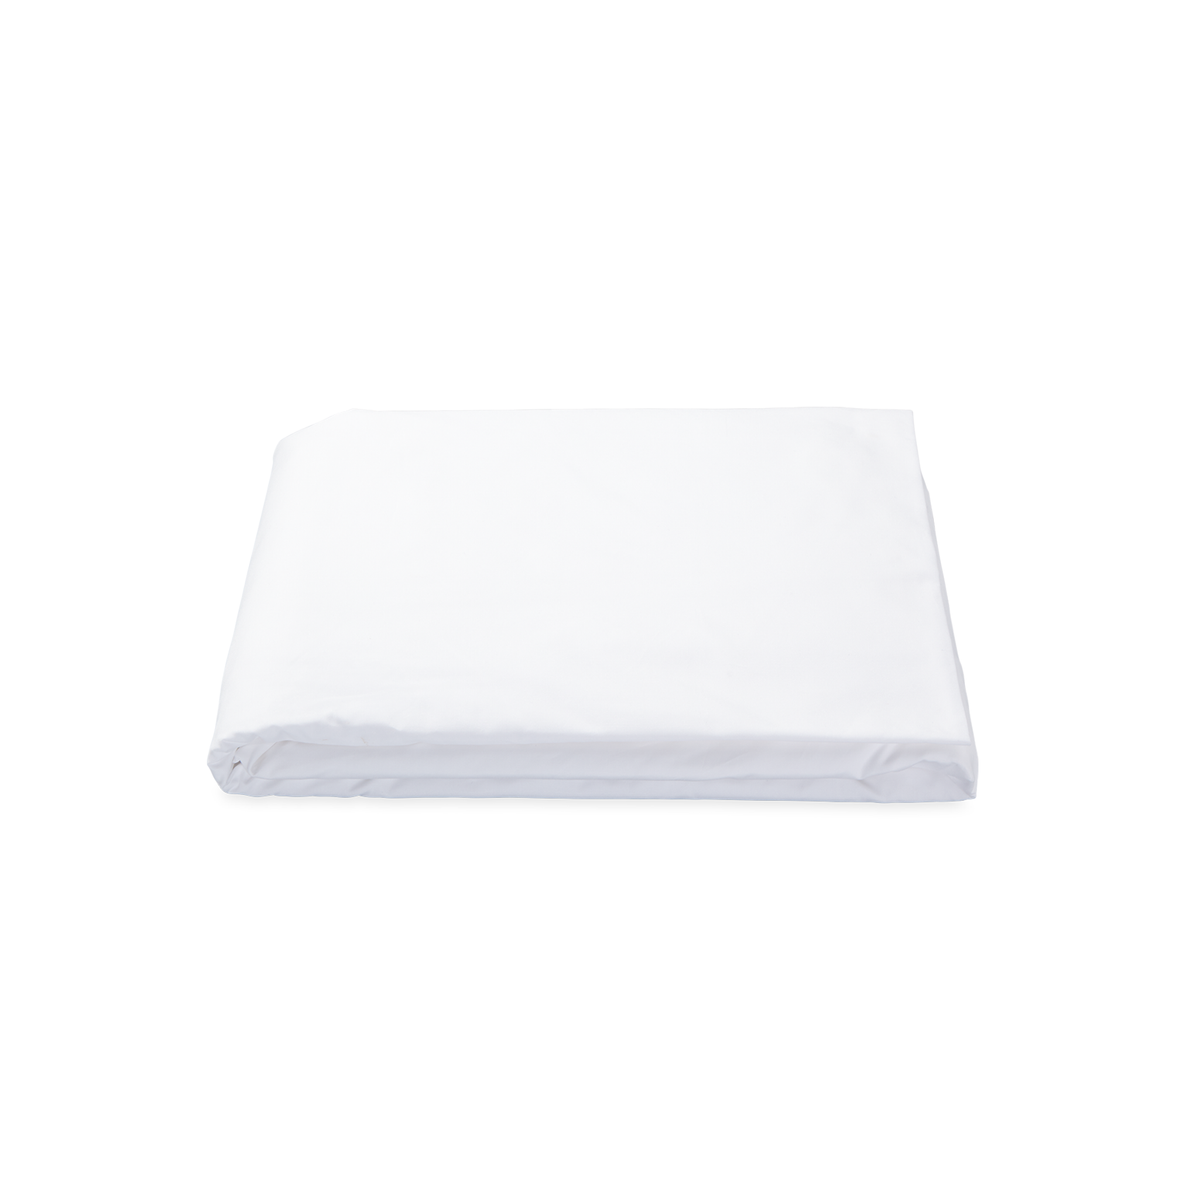 Silo of Matouk Luca Bedding Fitted Sheet White